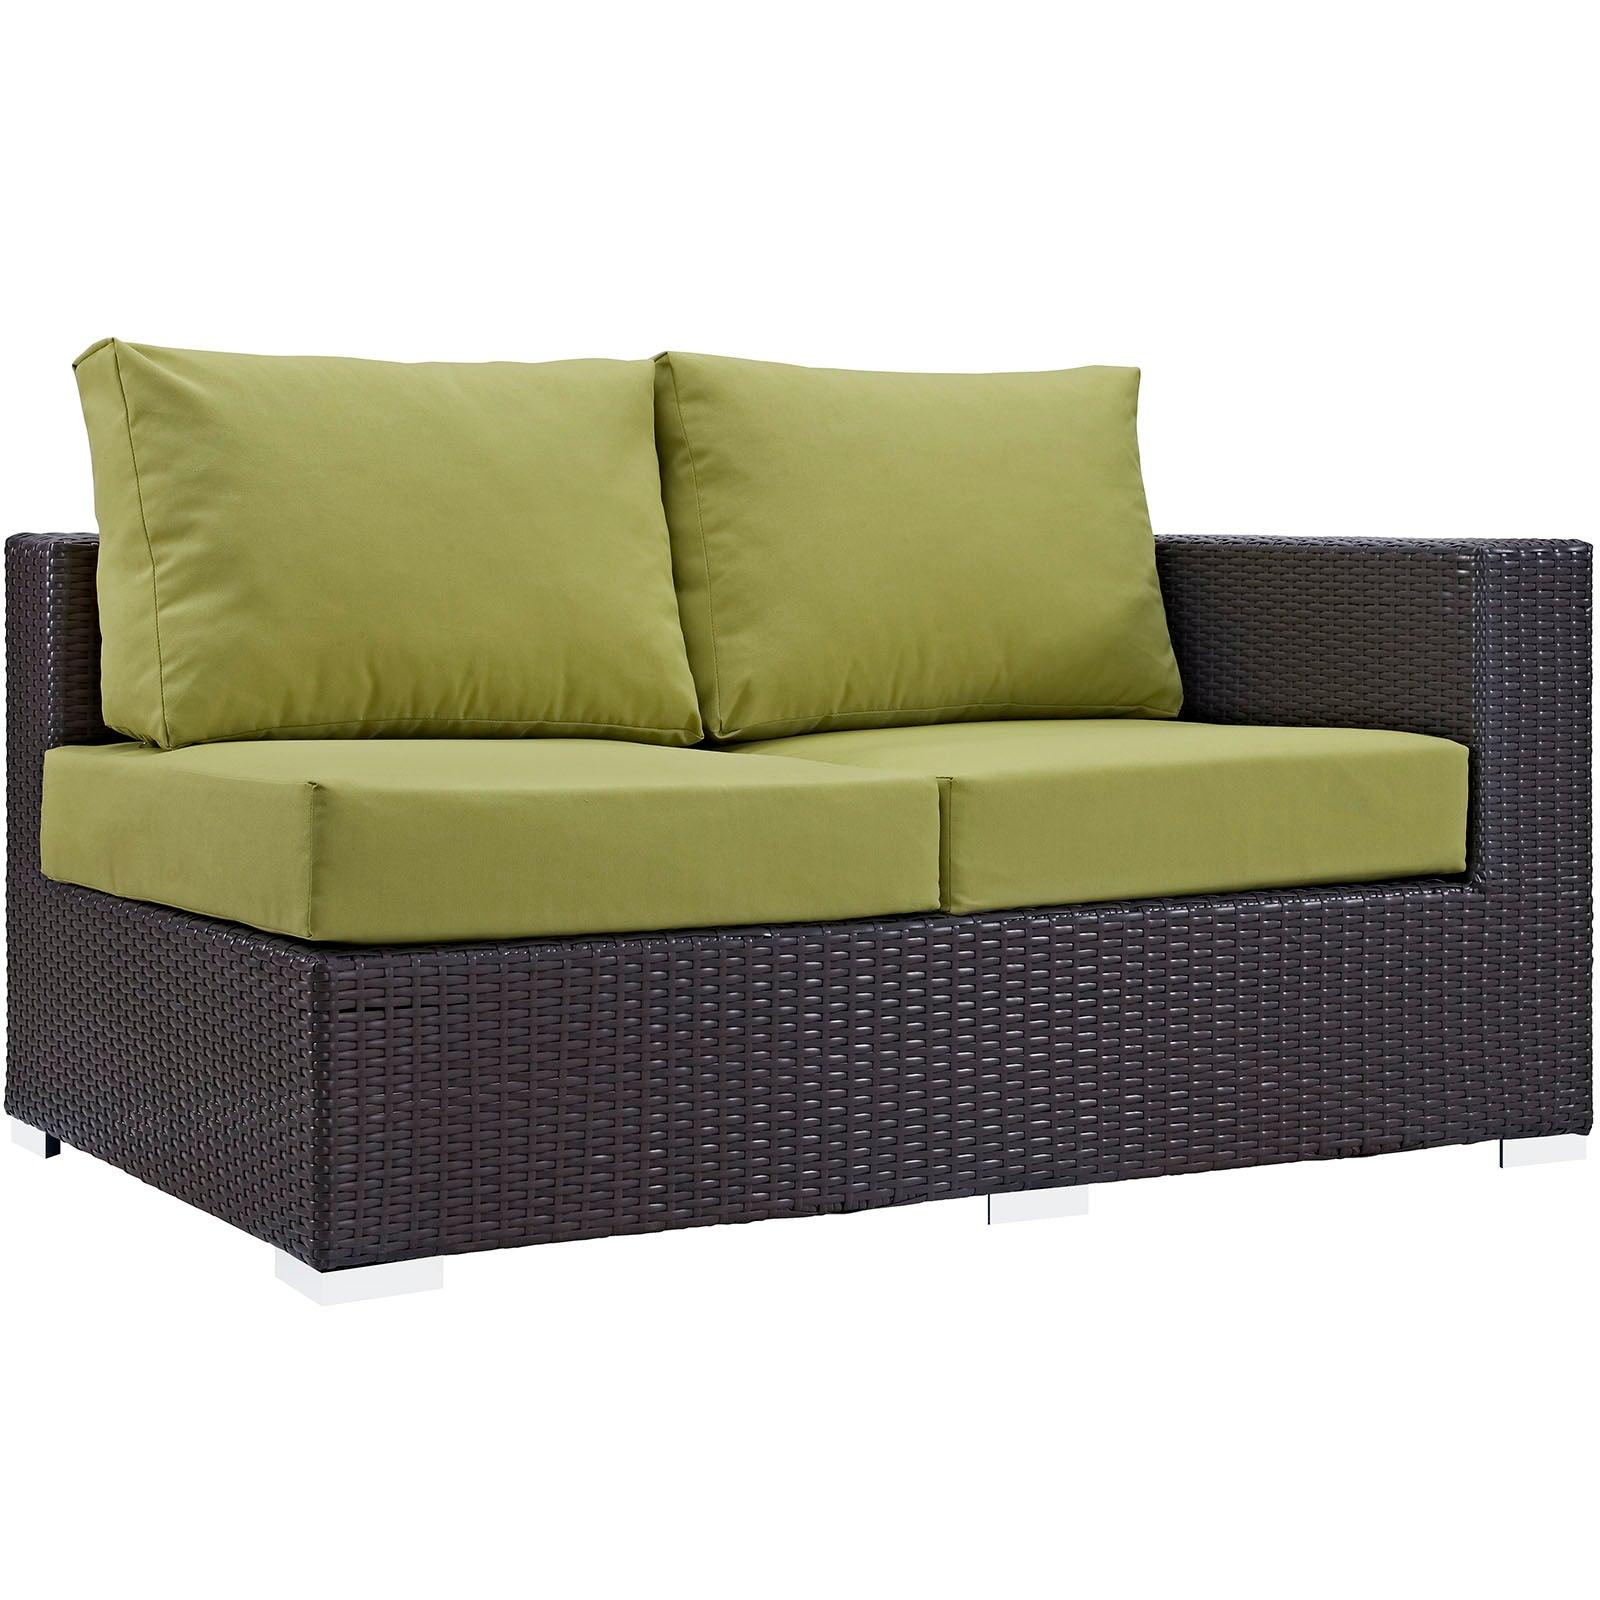 Modway Convene 4 Piece Outdoor Patio Daybed FredCo